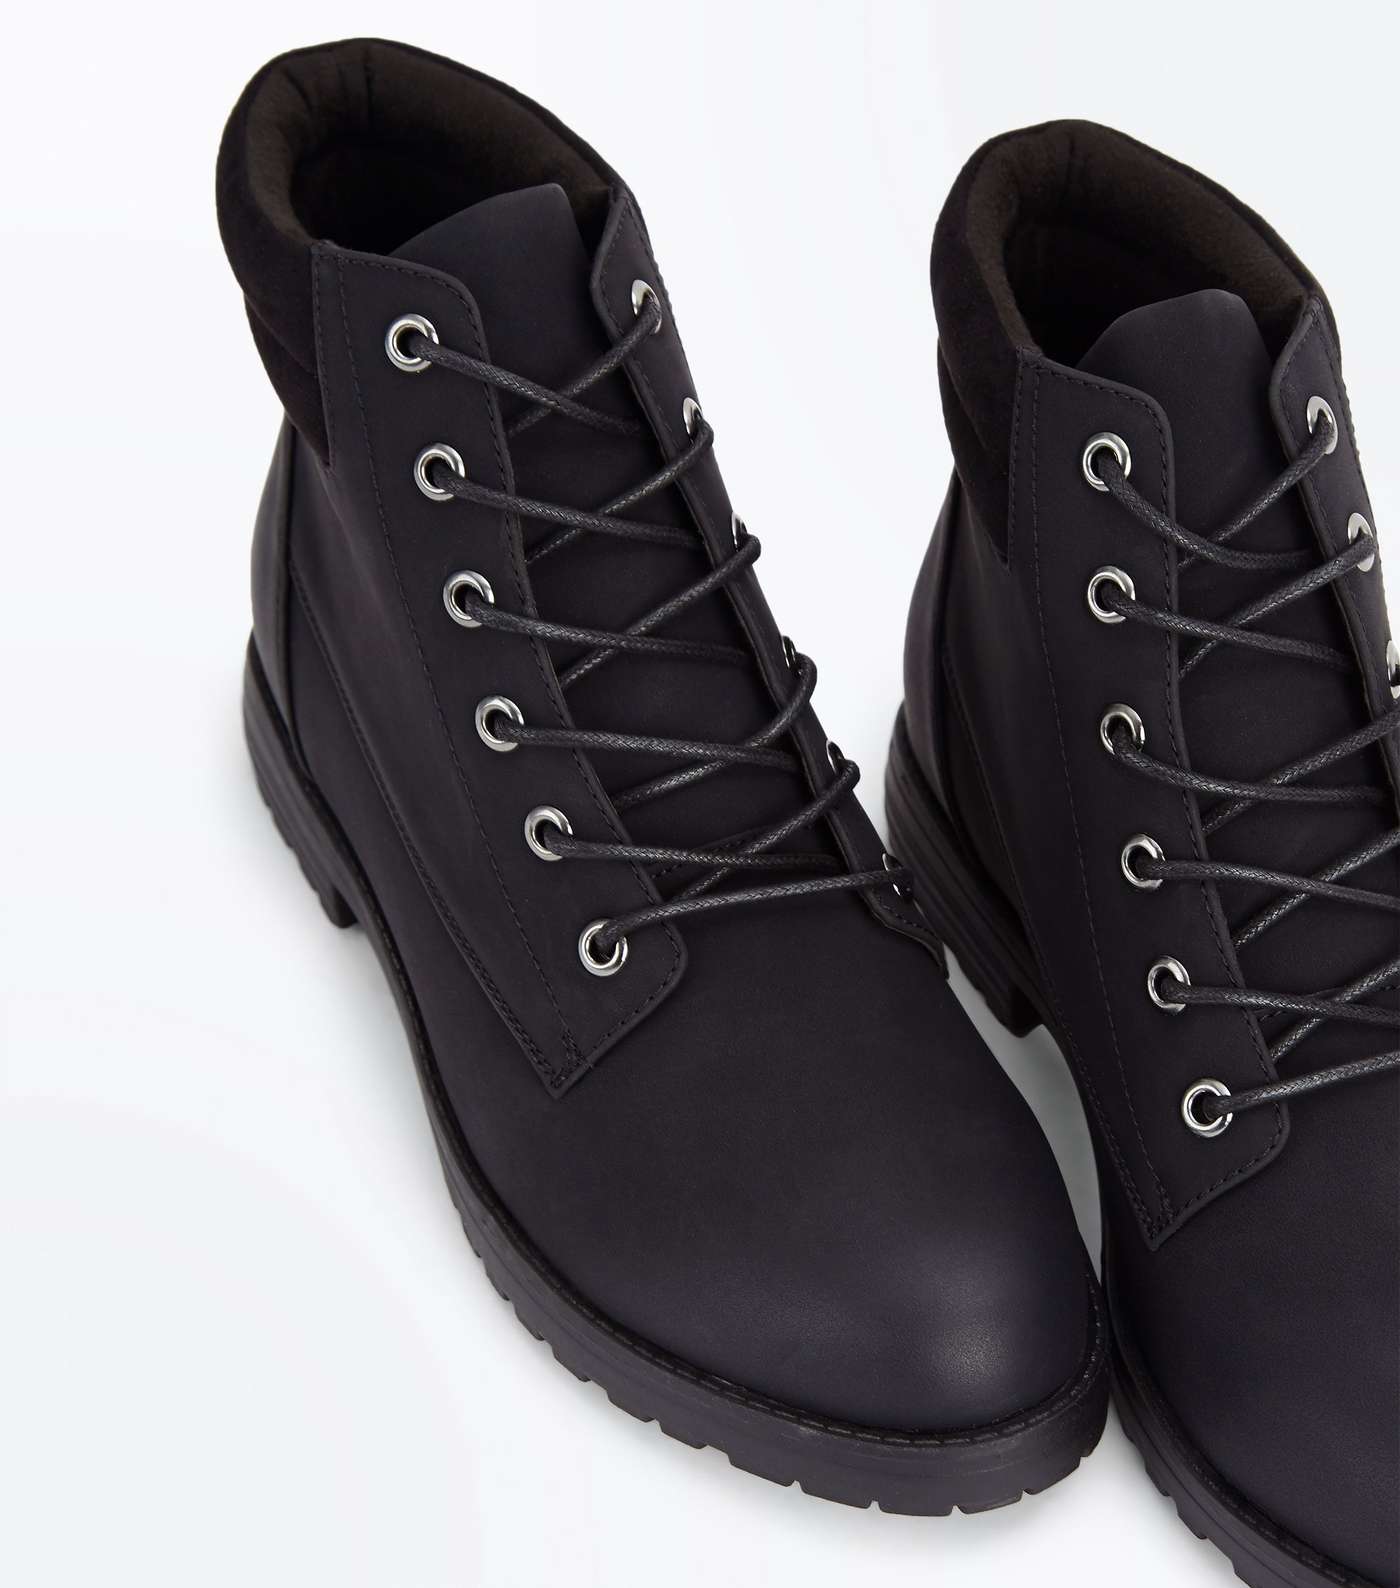 Black Contrast Cuff Lace Up Hiker Boots Image 3